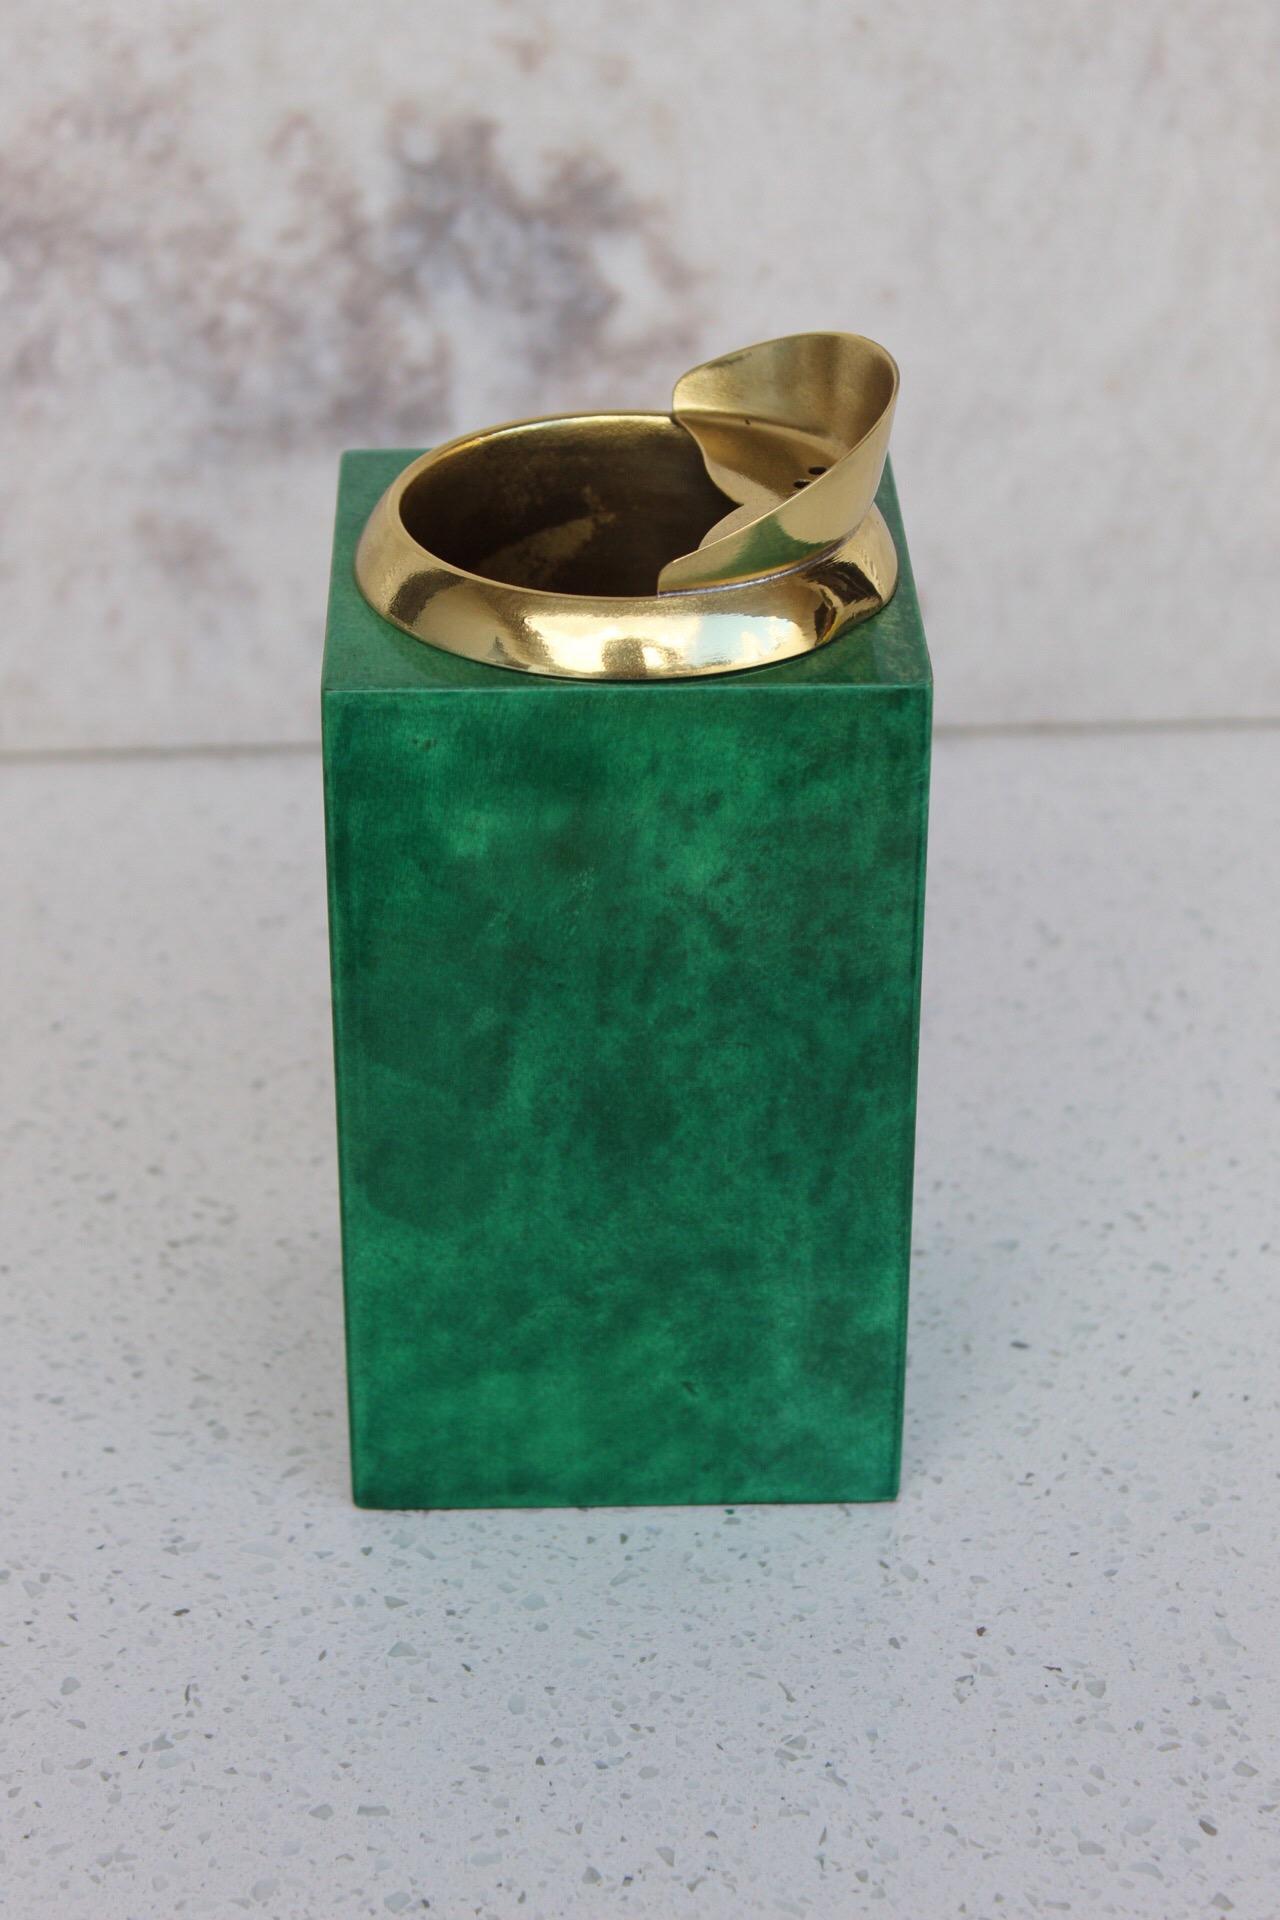 Mid-Century Modern Aldo small pitcher from the 1970s designed by Aldo Tura, lacquered in its most iconic color, green. Rectangular shape, solid wood with goatskin parchment.